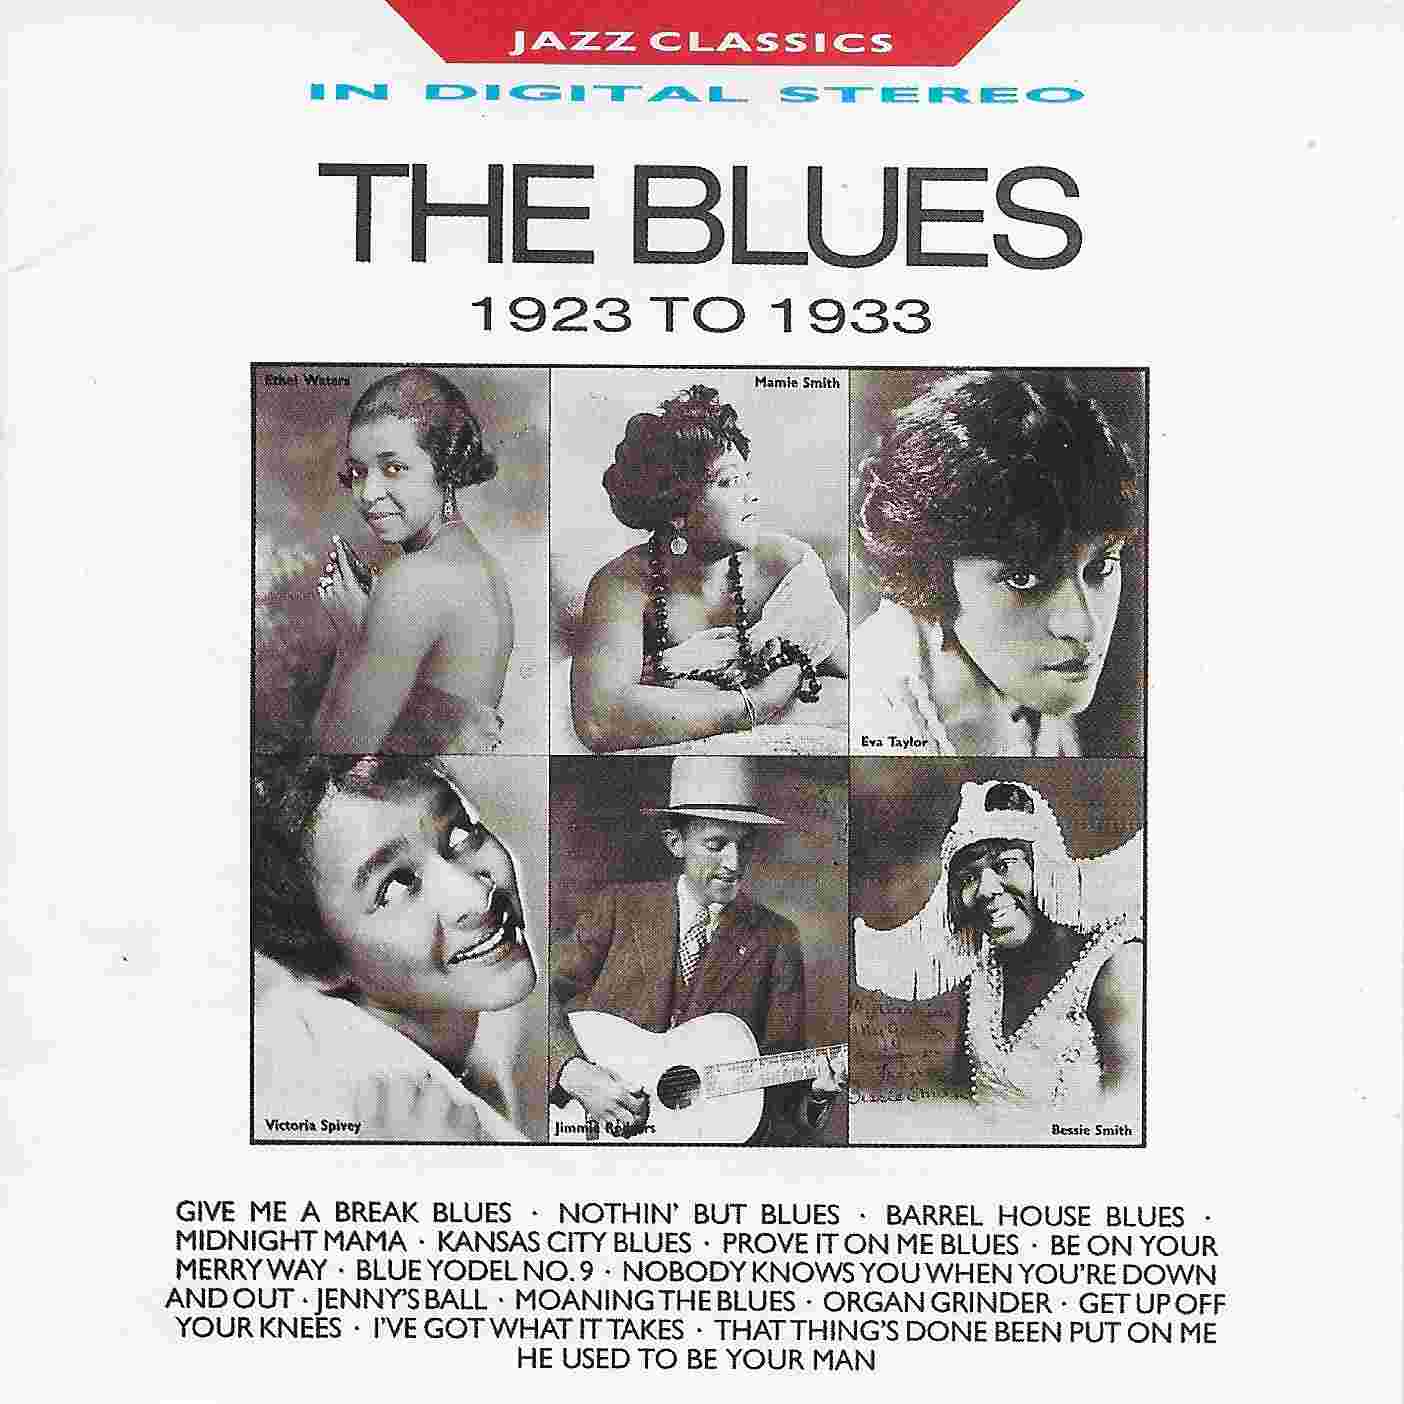 Picture of BBCCD683 Jazz classics - The blues 1929 - 1937 by artist Various from the BBC cds - Records and Tapes library